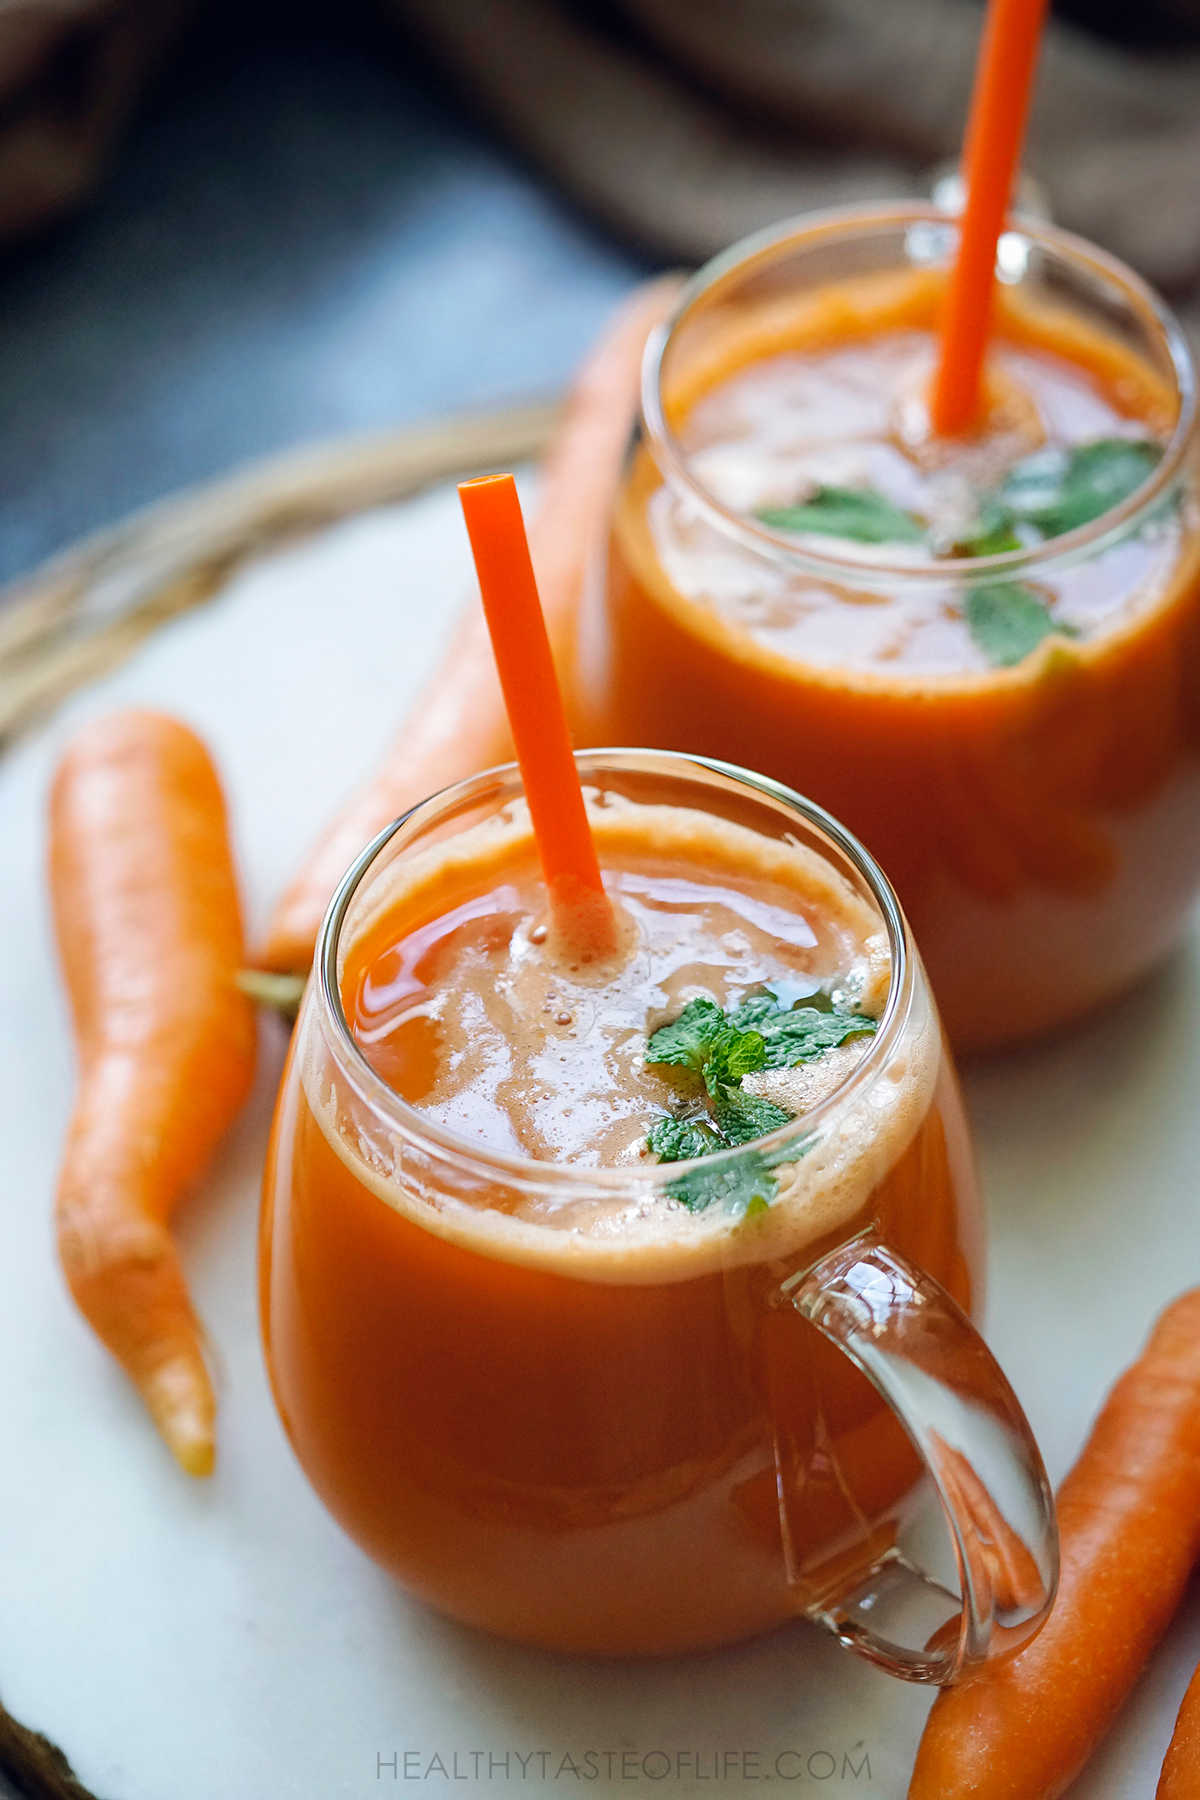 Juicing recipes with carrots: carrot juice in mixed in a blender.